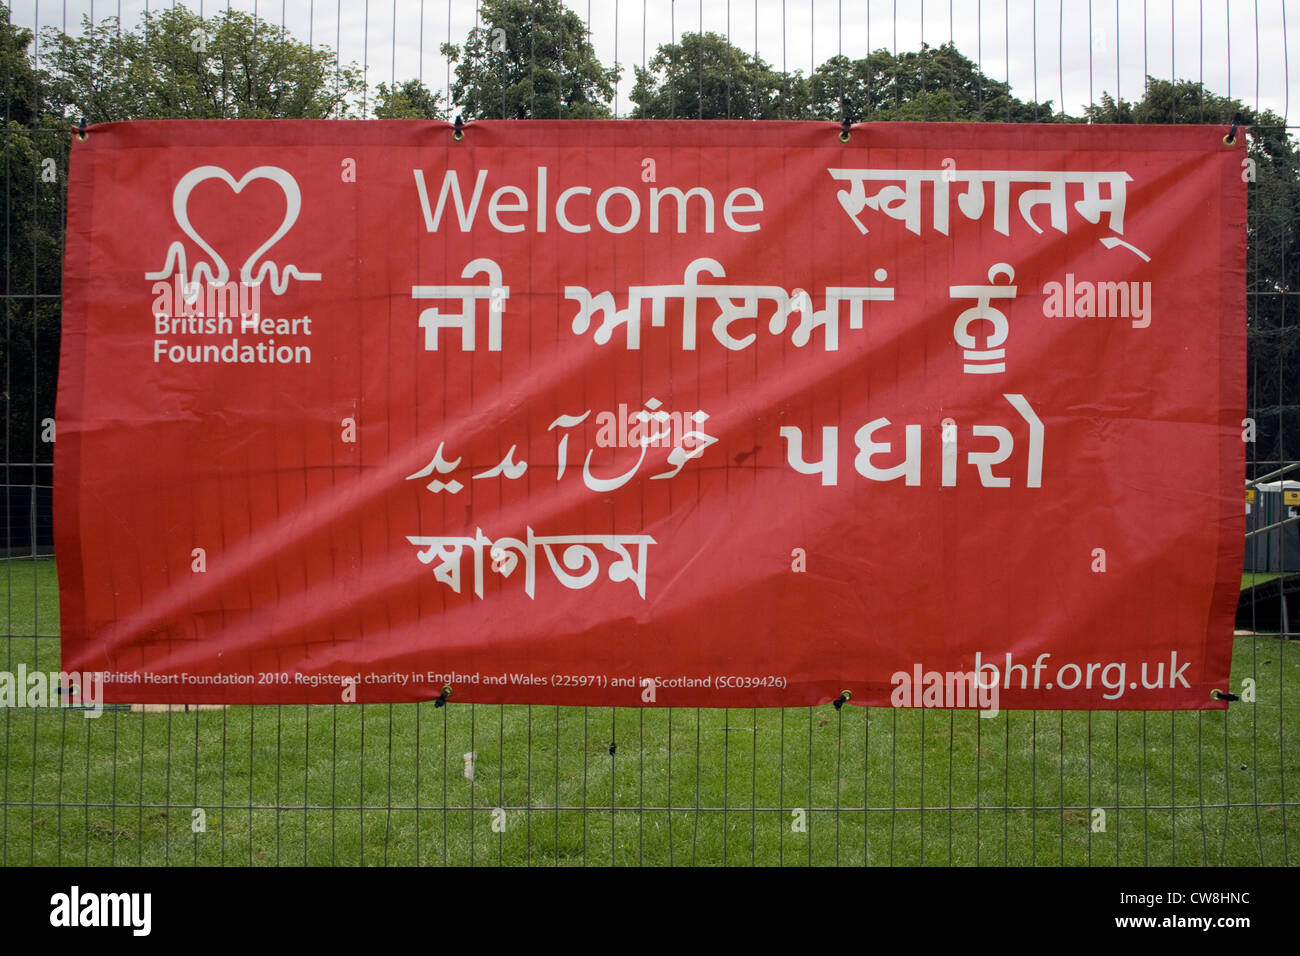 Welcome Multi lingual, multi-language, multicultural sign for the British Heart Foundation (BHF) Stock Photo